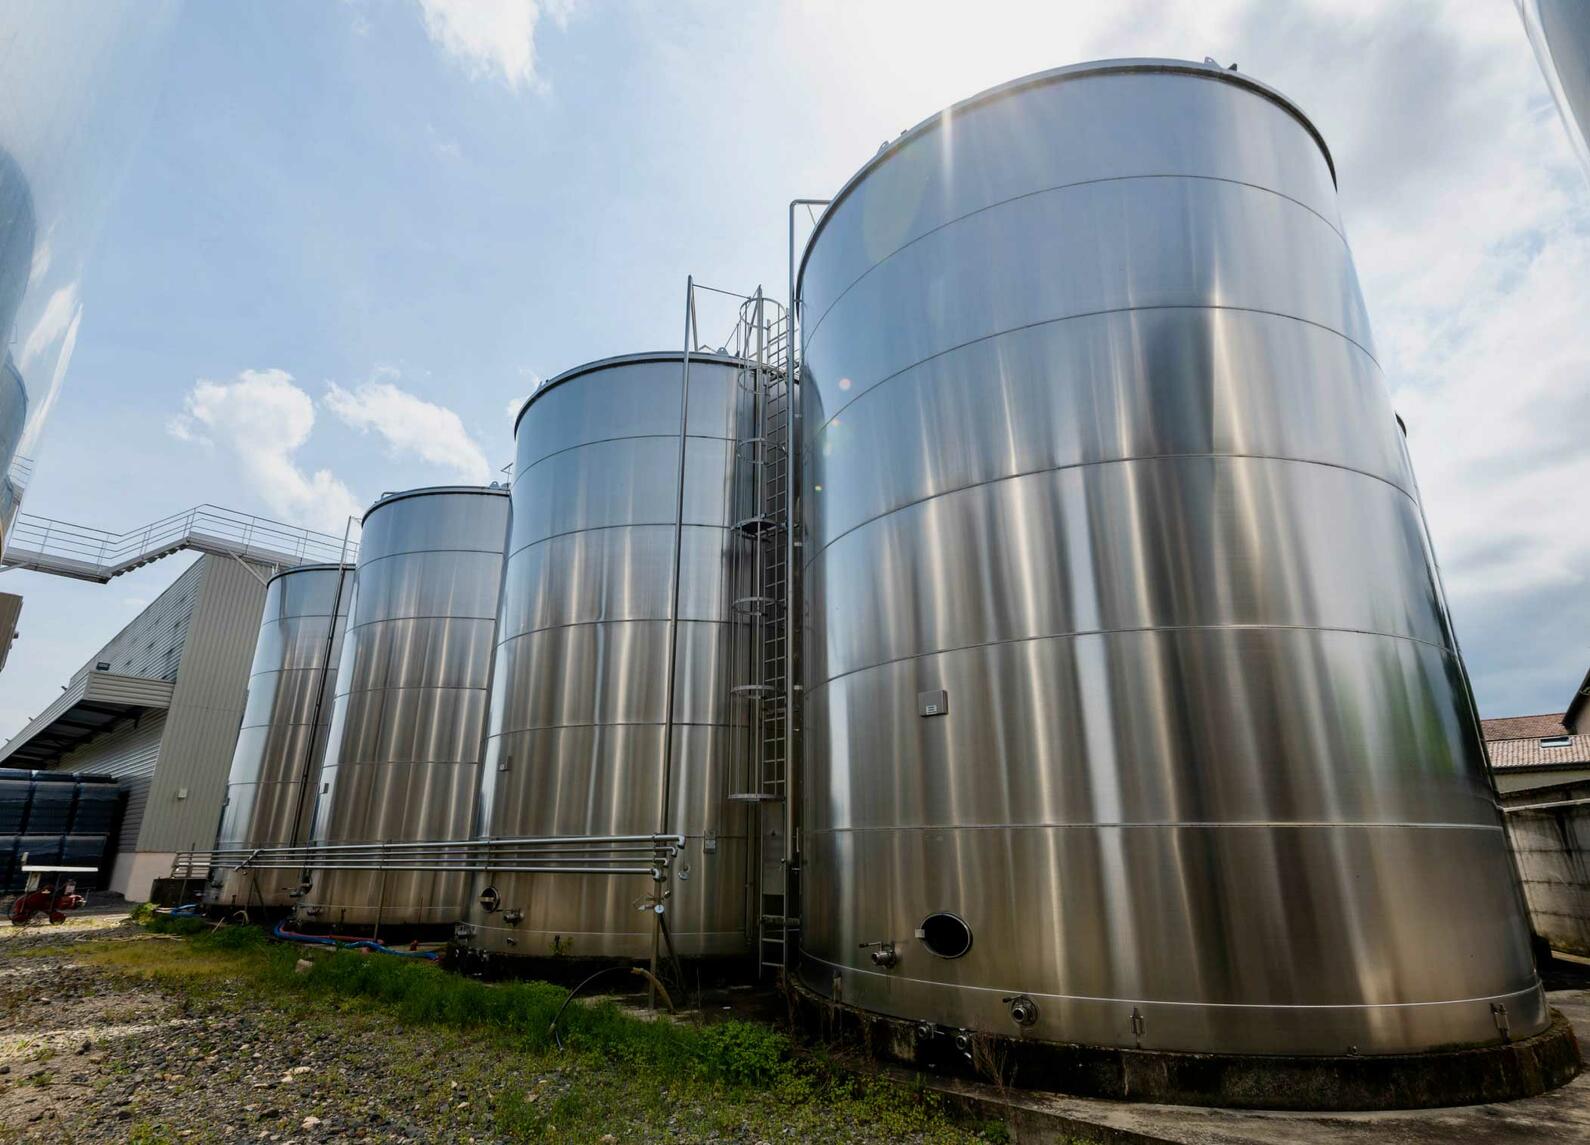 316 stainless steel tank - In-ground with flat sloping base